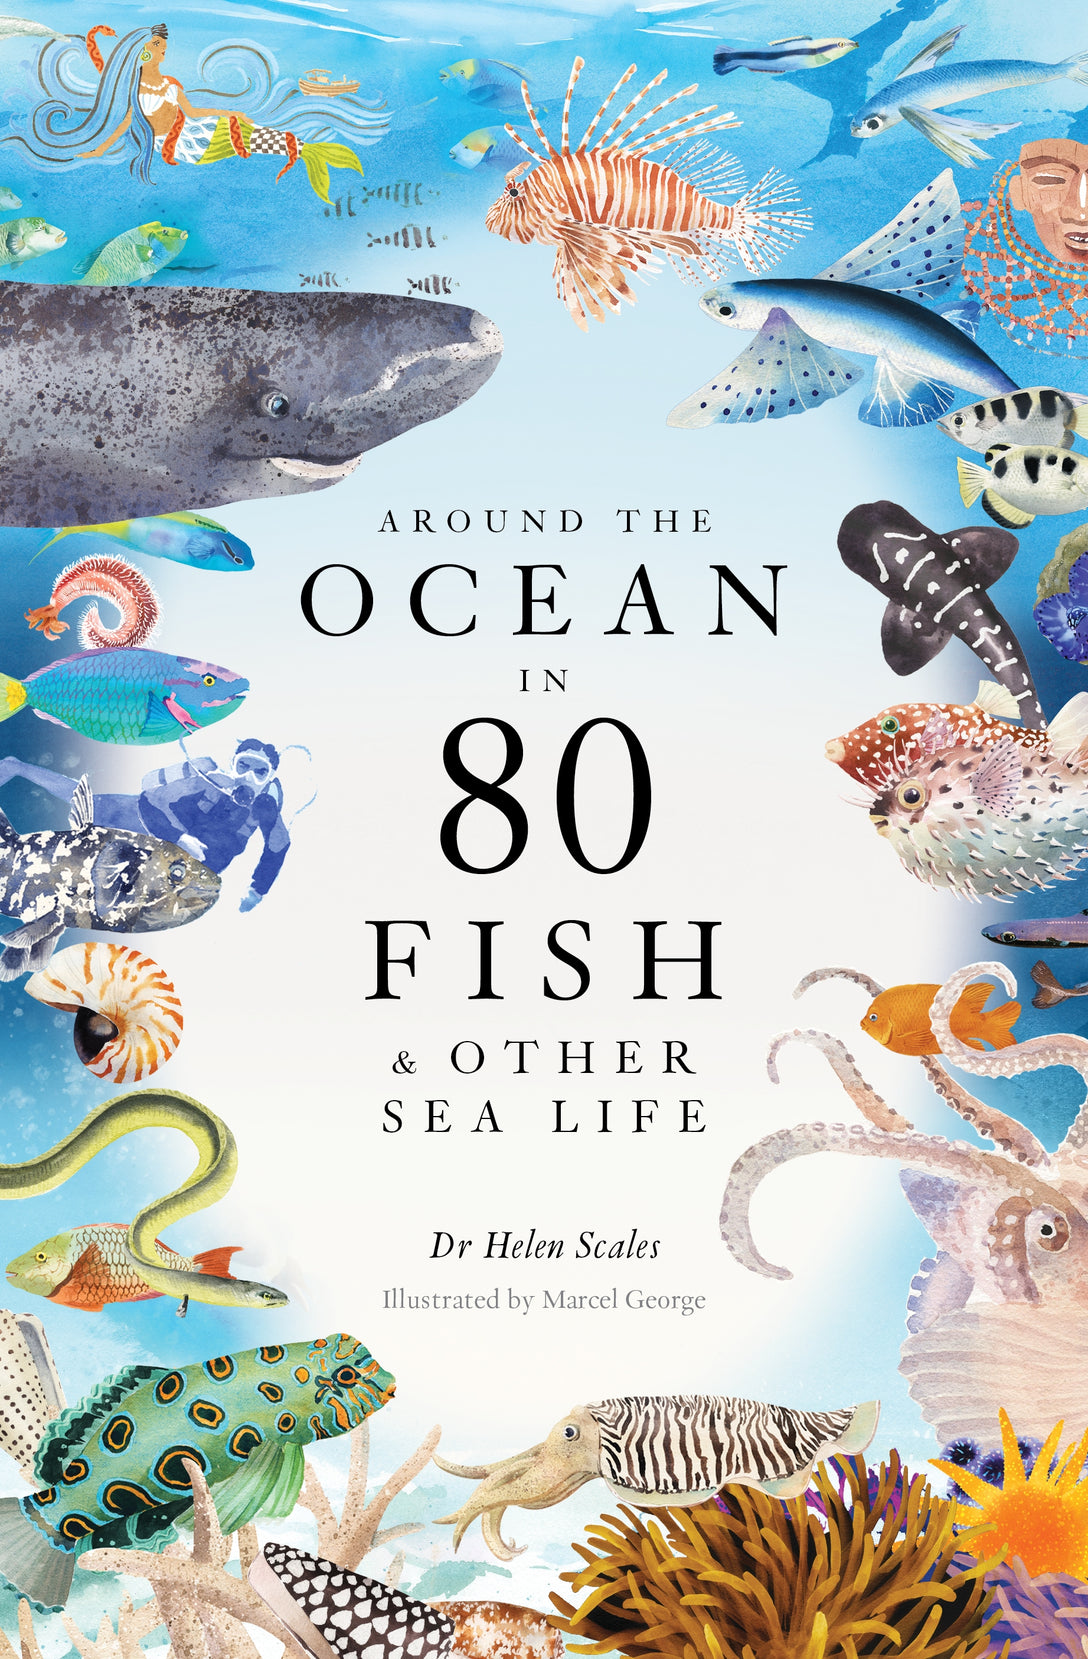 Around the Ocean in 80 Fish and other Sea Life by Marcel George, Helen Scales